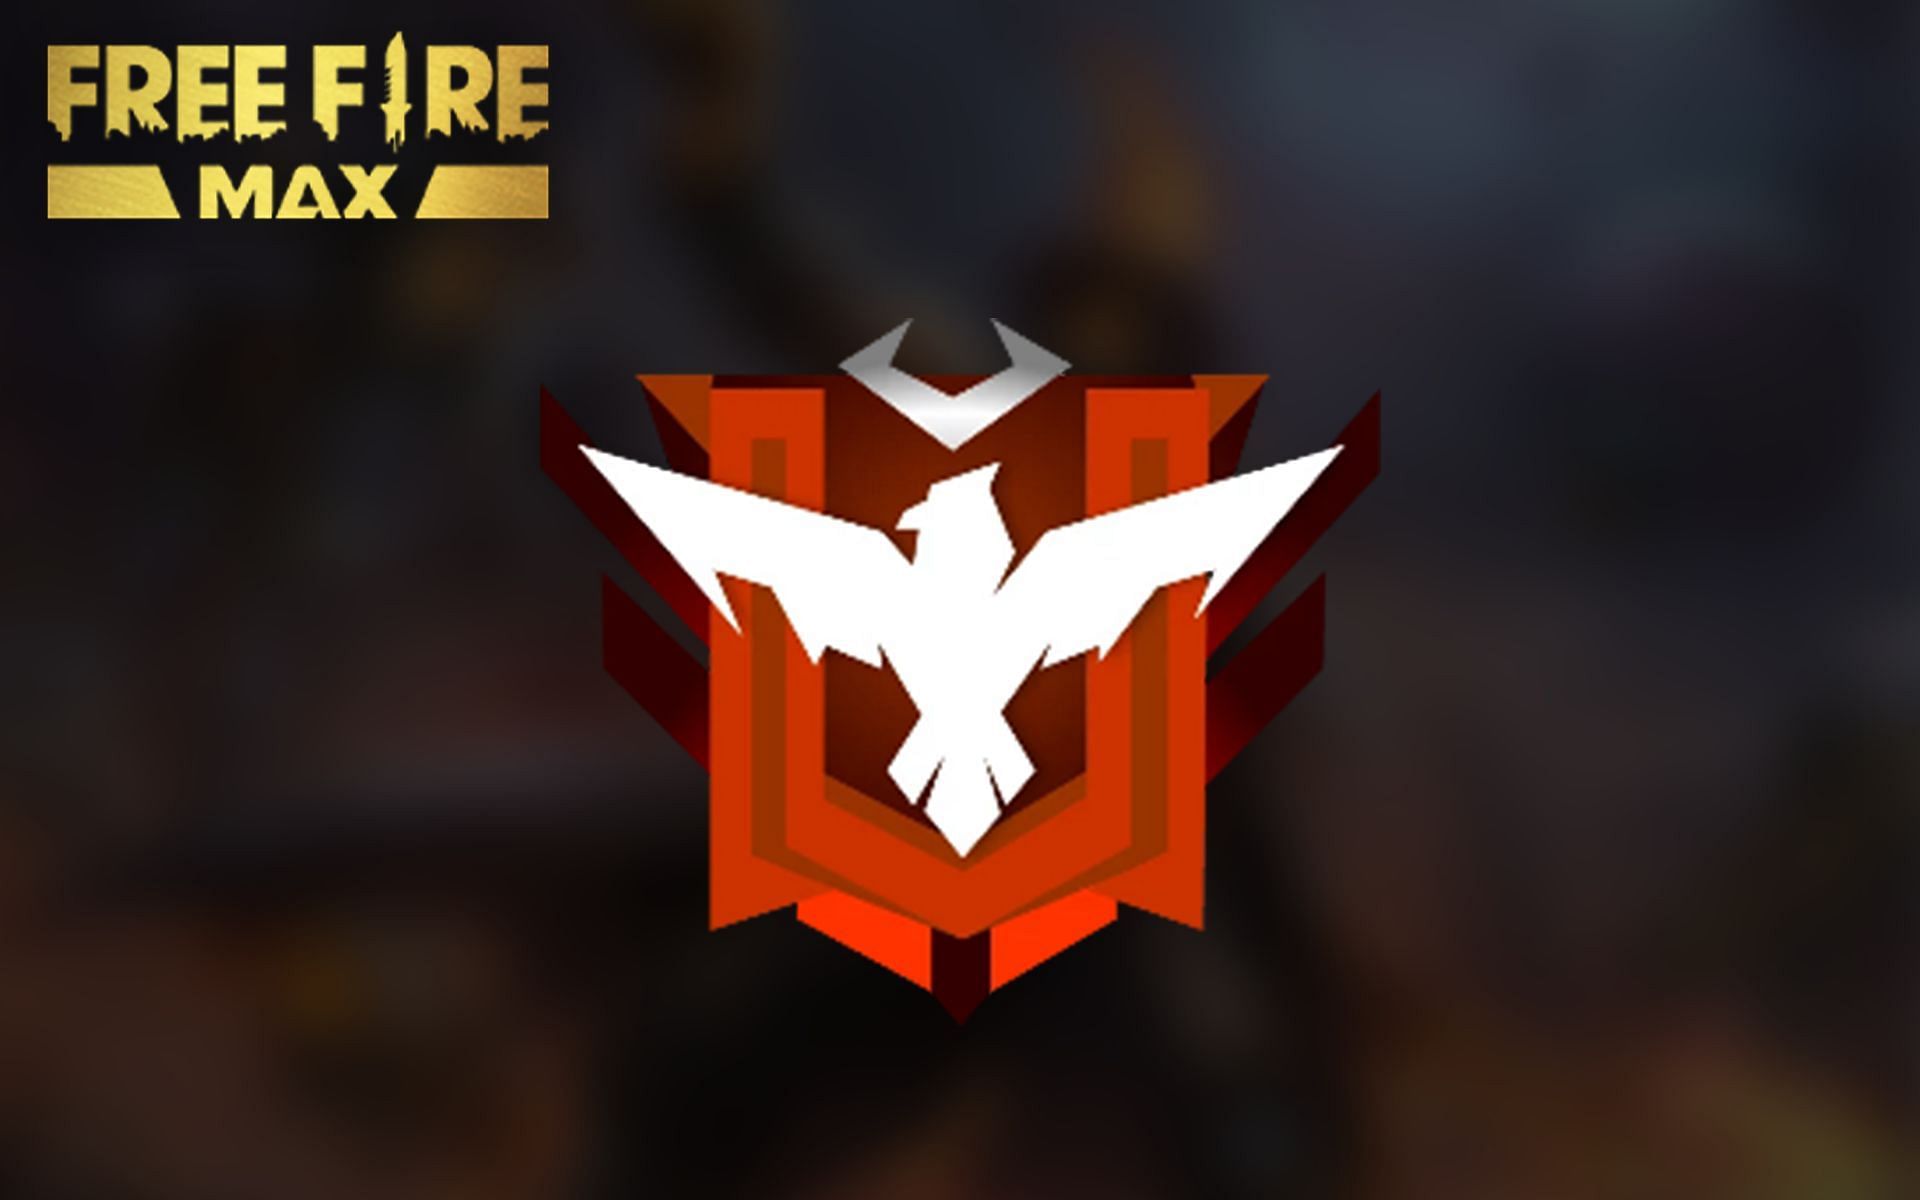 Many gamers wish to reach Heroic in Free Fire MAX (Image via Garena)